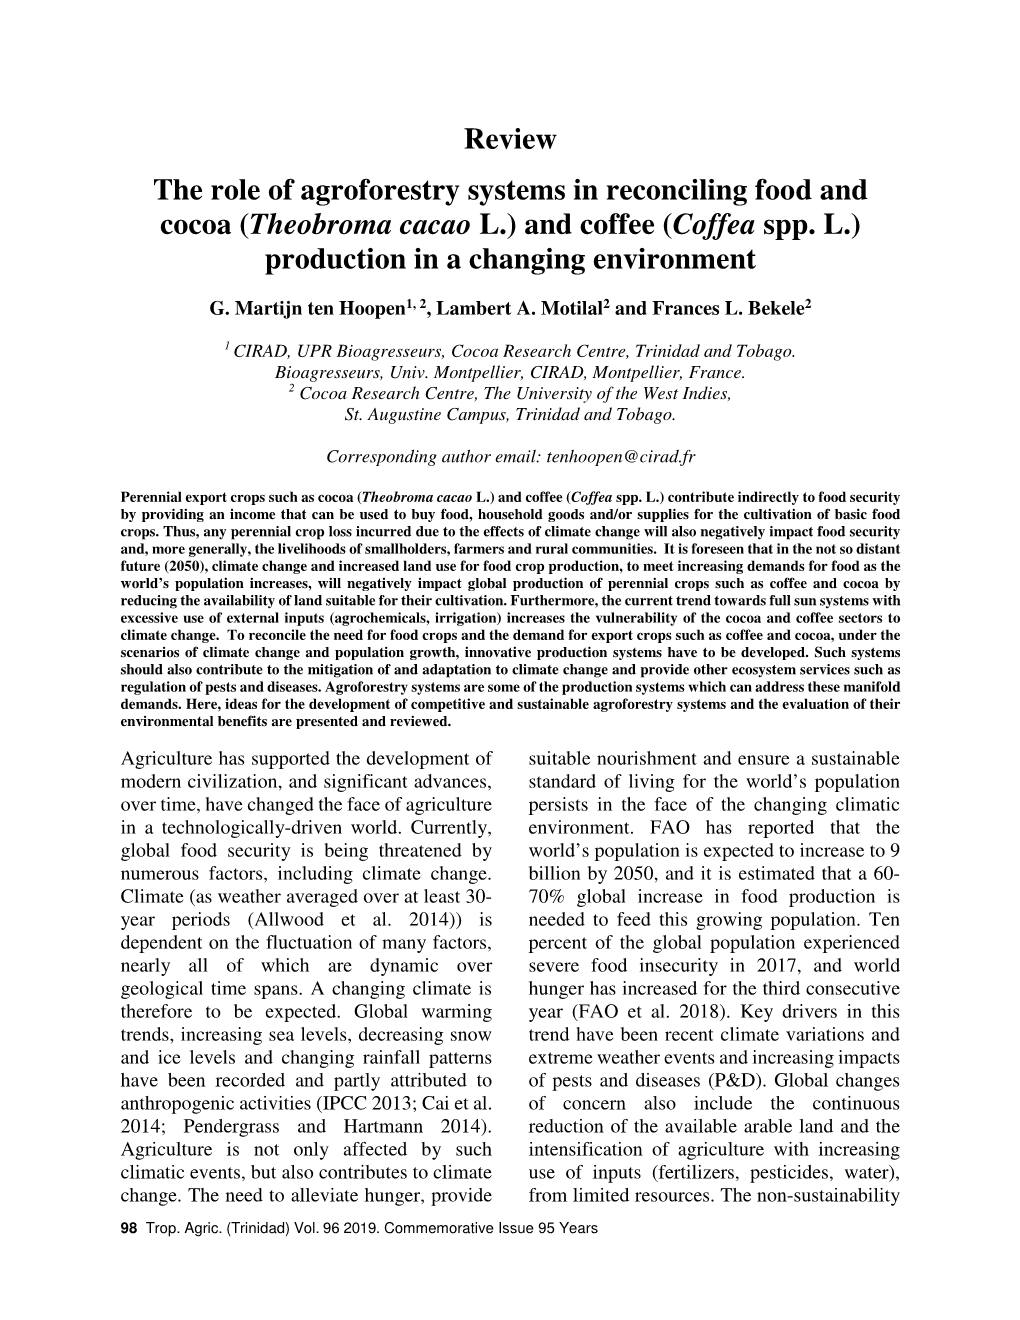 Review the Role of Agroforestry Systems in Reconciling Food and Cocoa (Theobroma Cacao L.) and Coffee (Coffea Spp